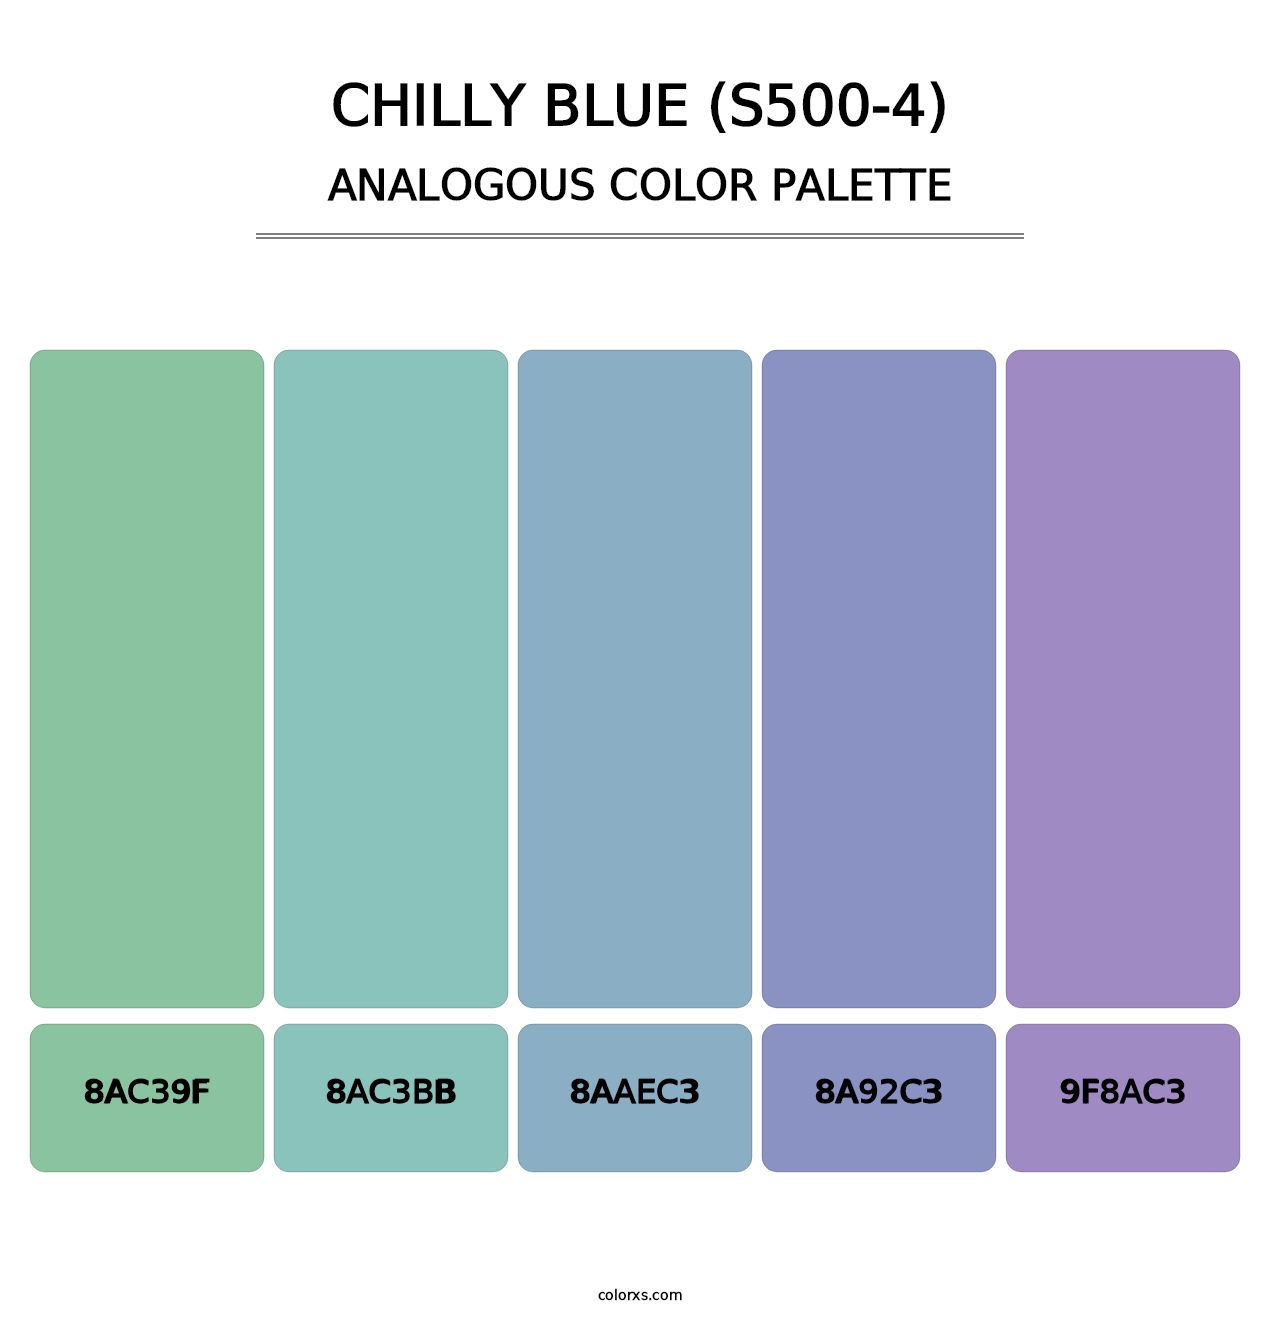 Chilly Blue (S500-4) - Analogous Color Palette